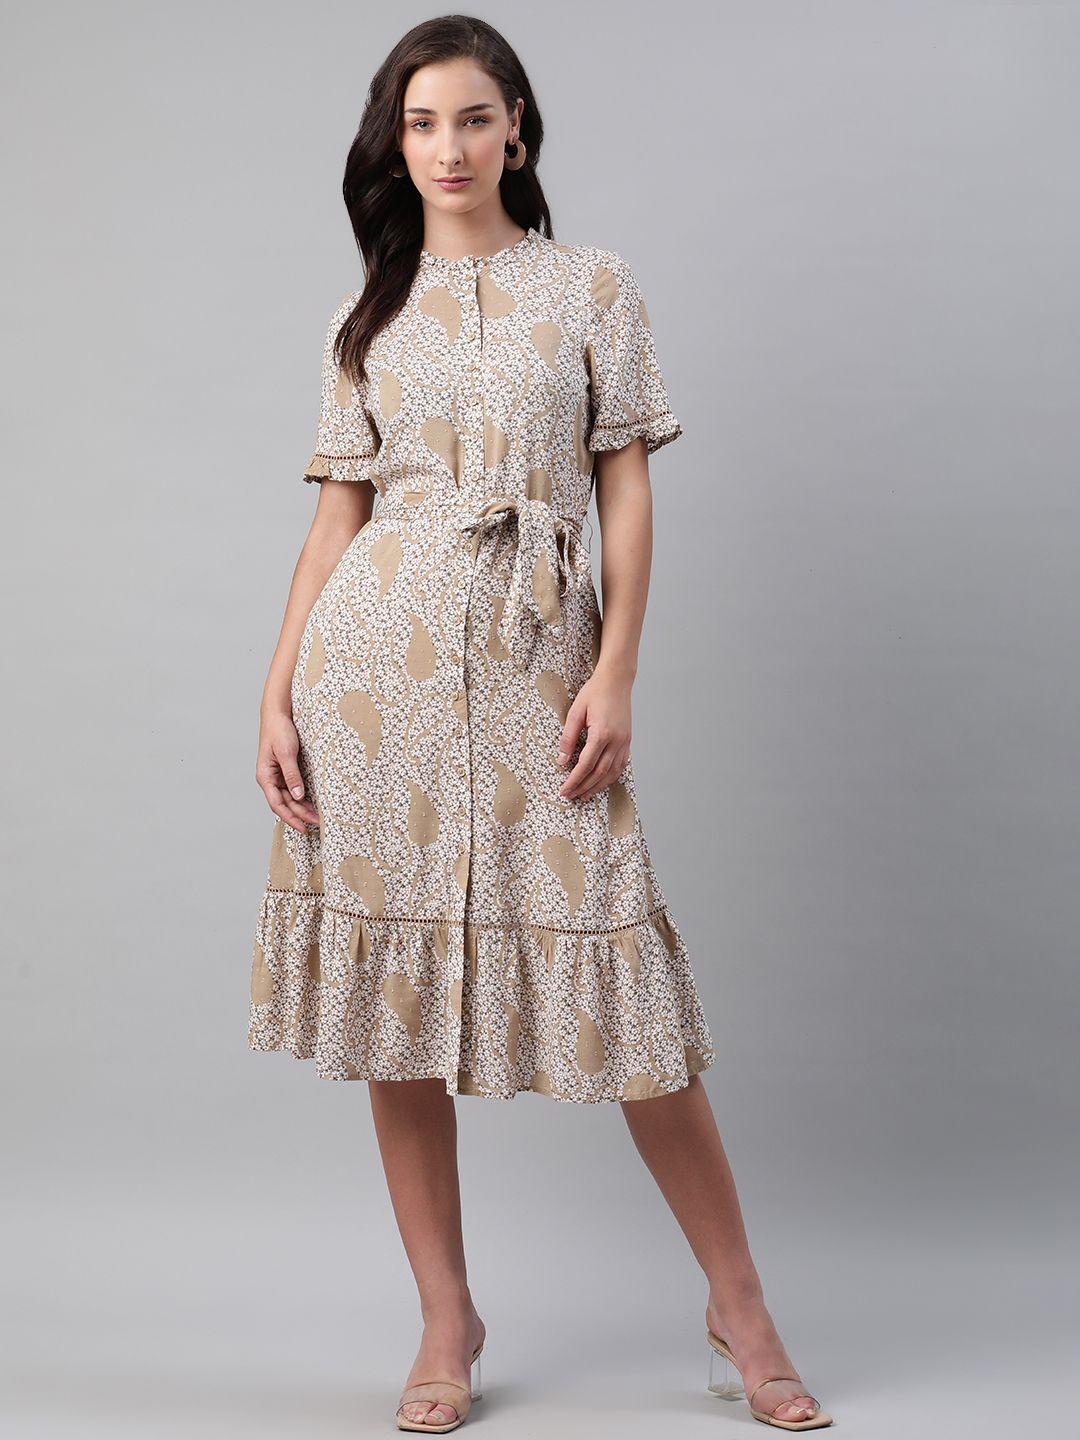 marks & spencer women beige & white linen paisley & ditsy floral printed a-line dress